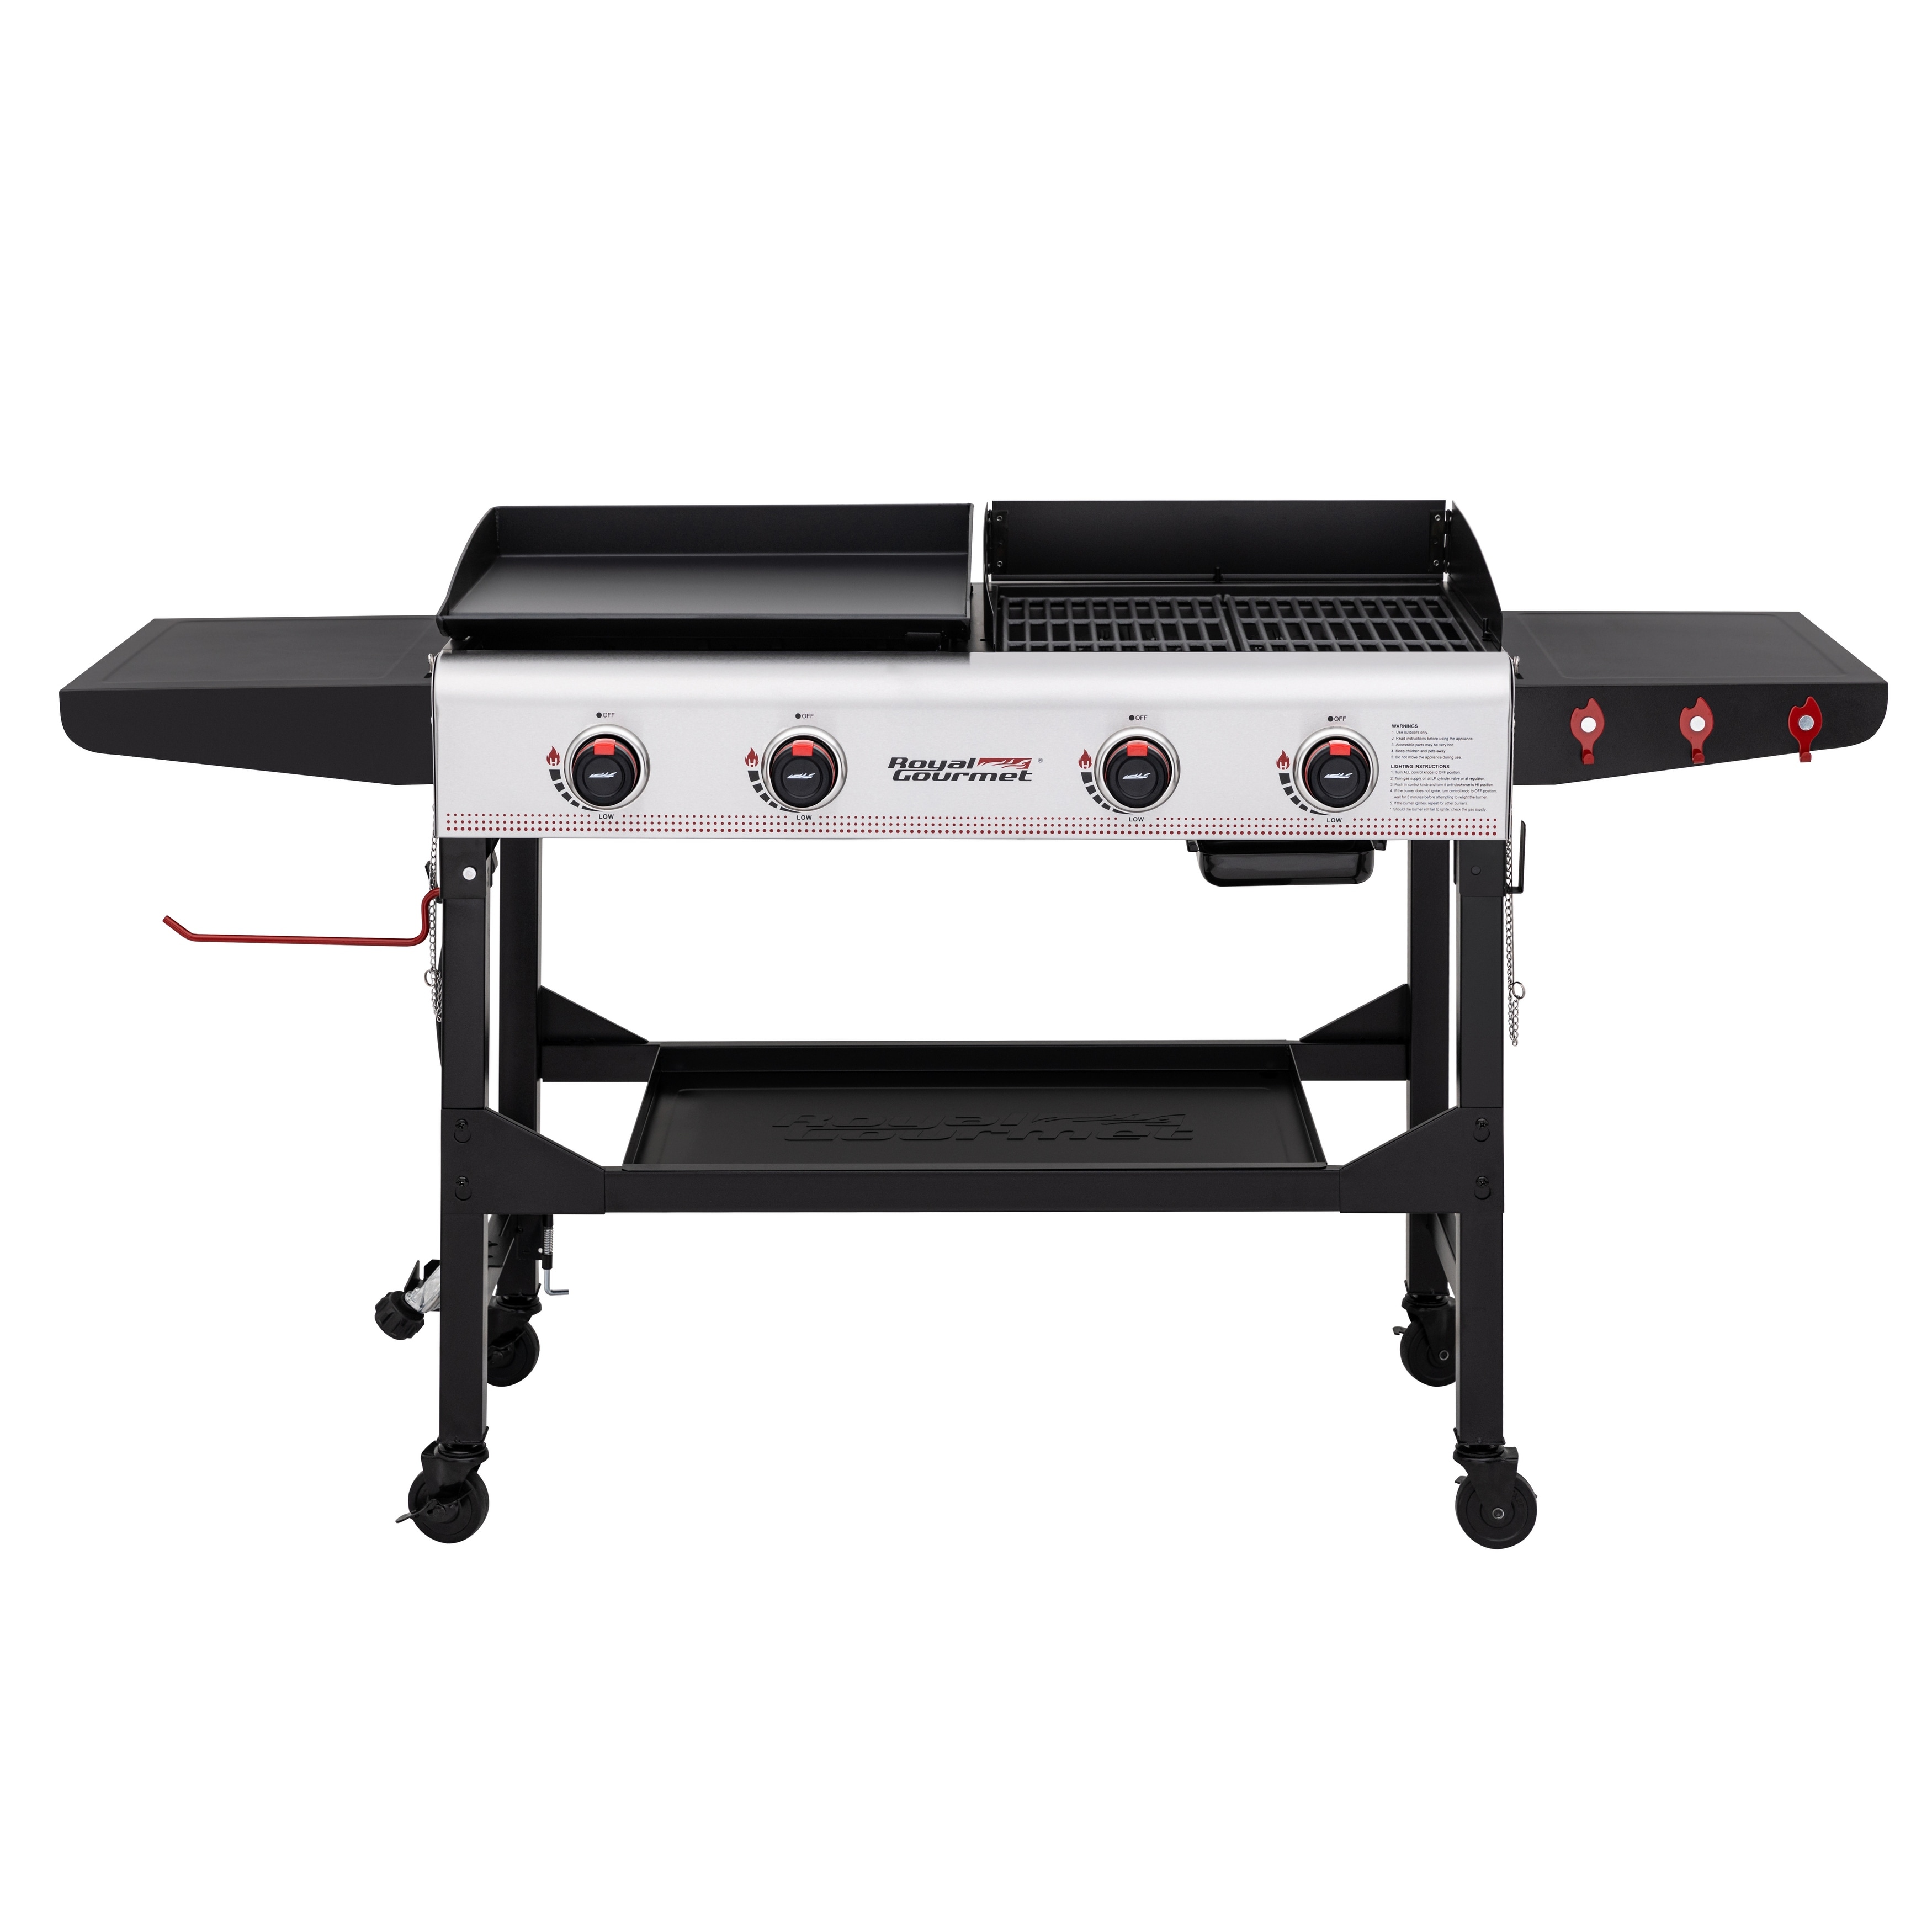 Blackstone Table Top Grill - 17 Inch Portable Gas Griddle - Propane Fueled  - For Outdoor Cooking While Camping, Tailgating or Picnicking 